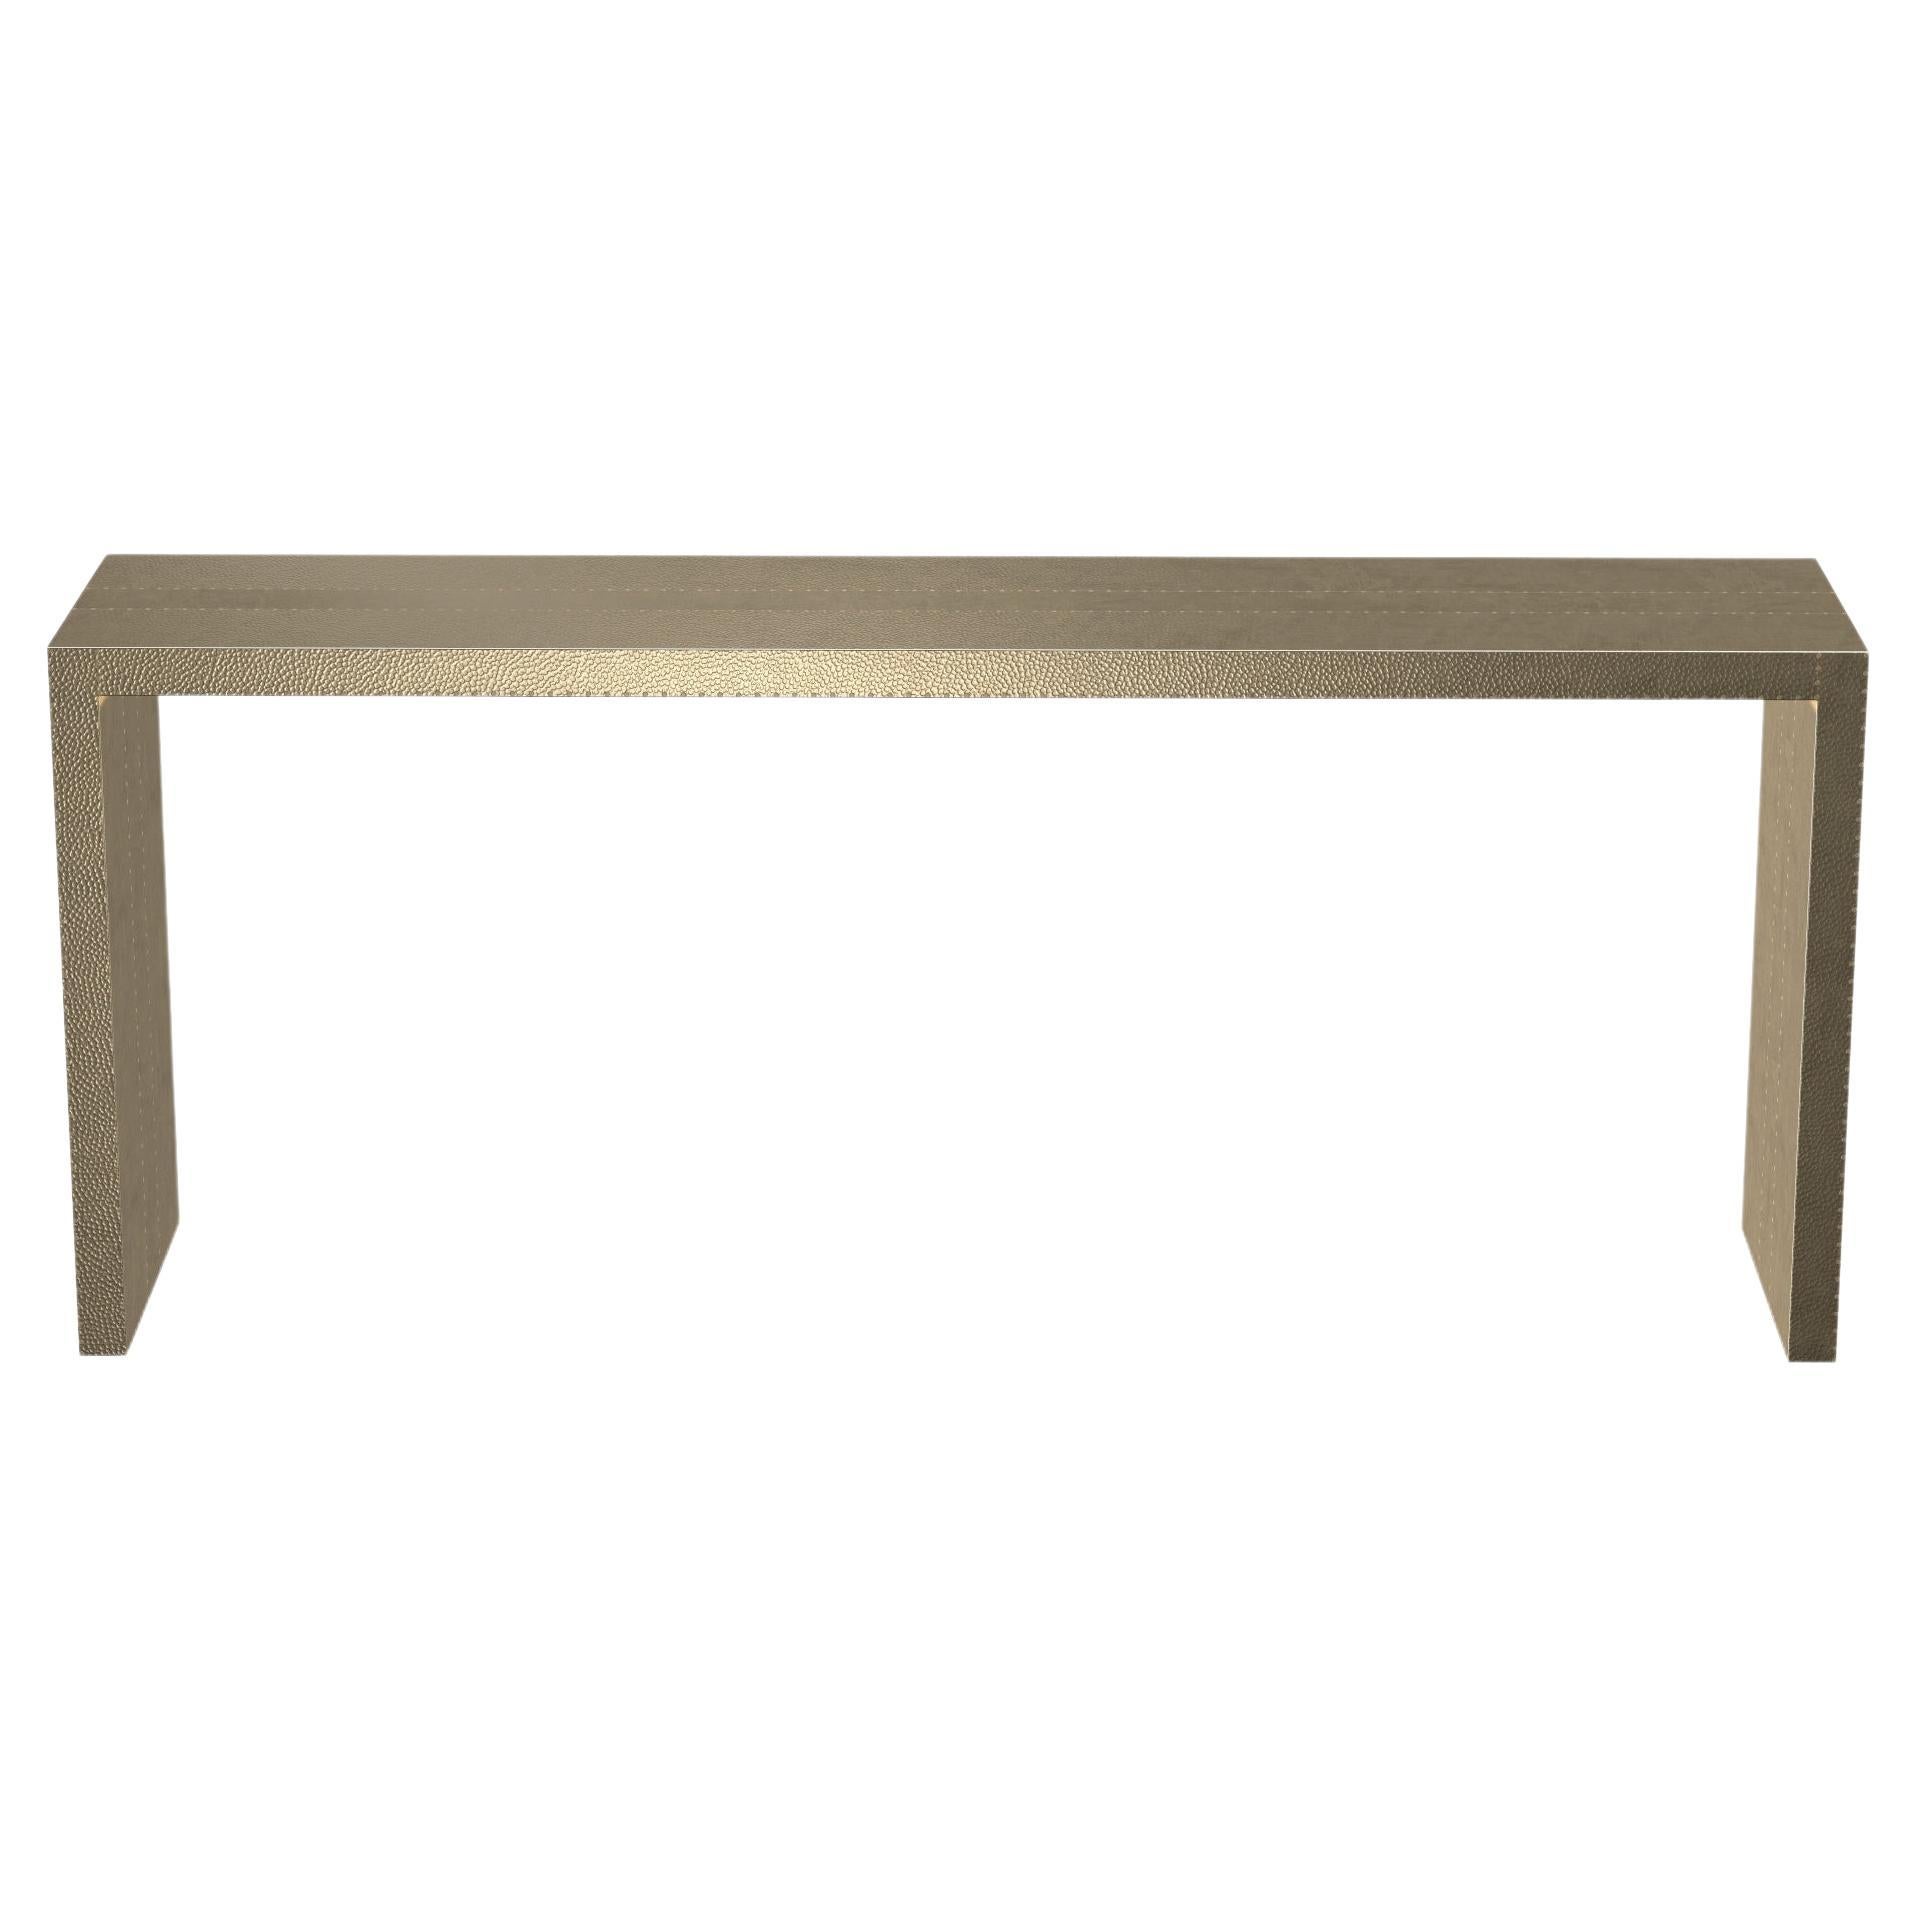 Art Nouveau Tray Console Tables Mid. Hammered in Brass by Alison Spear For Sale